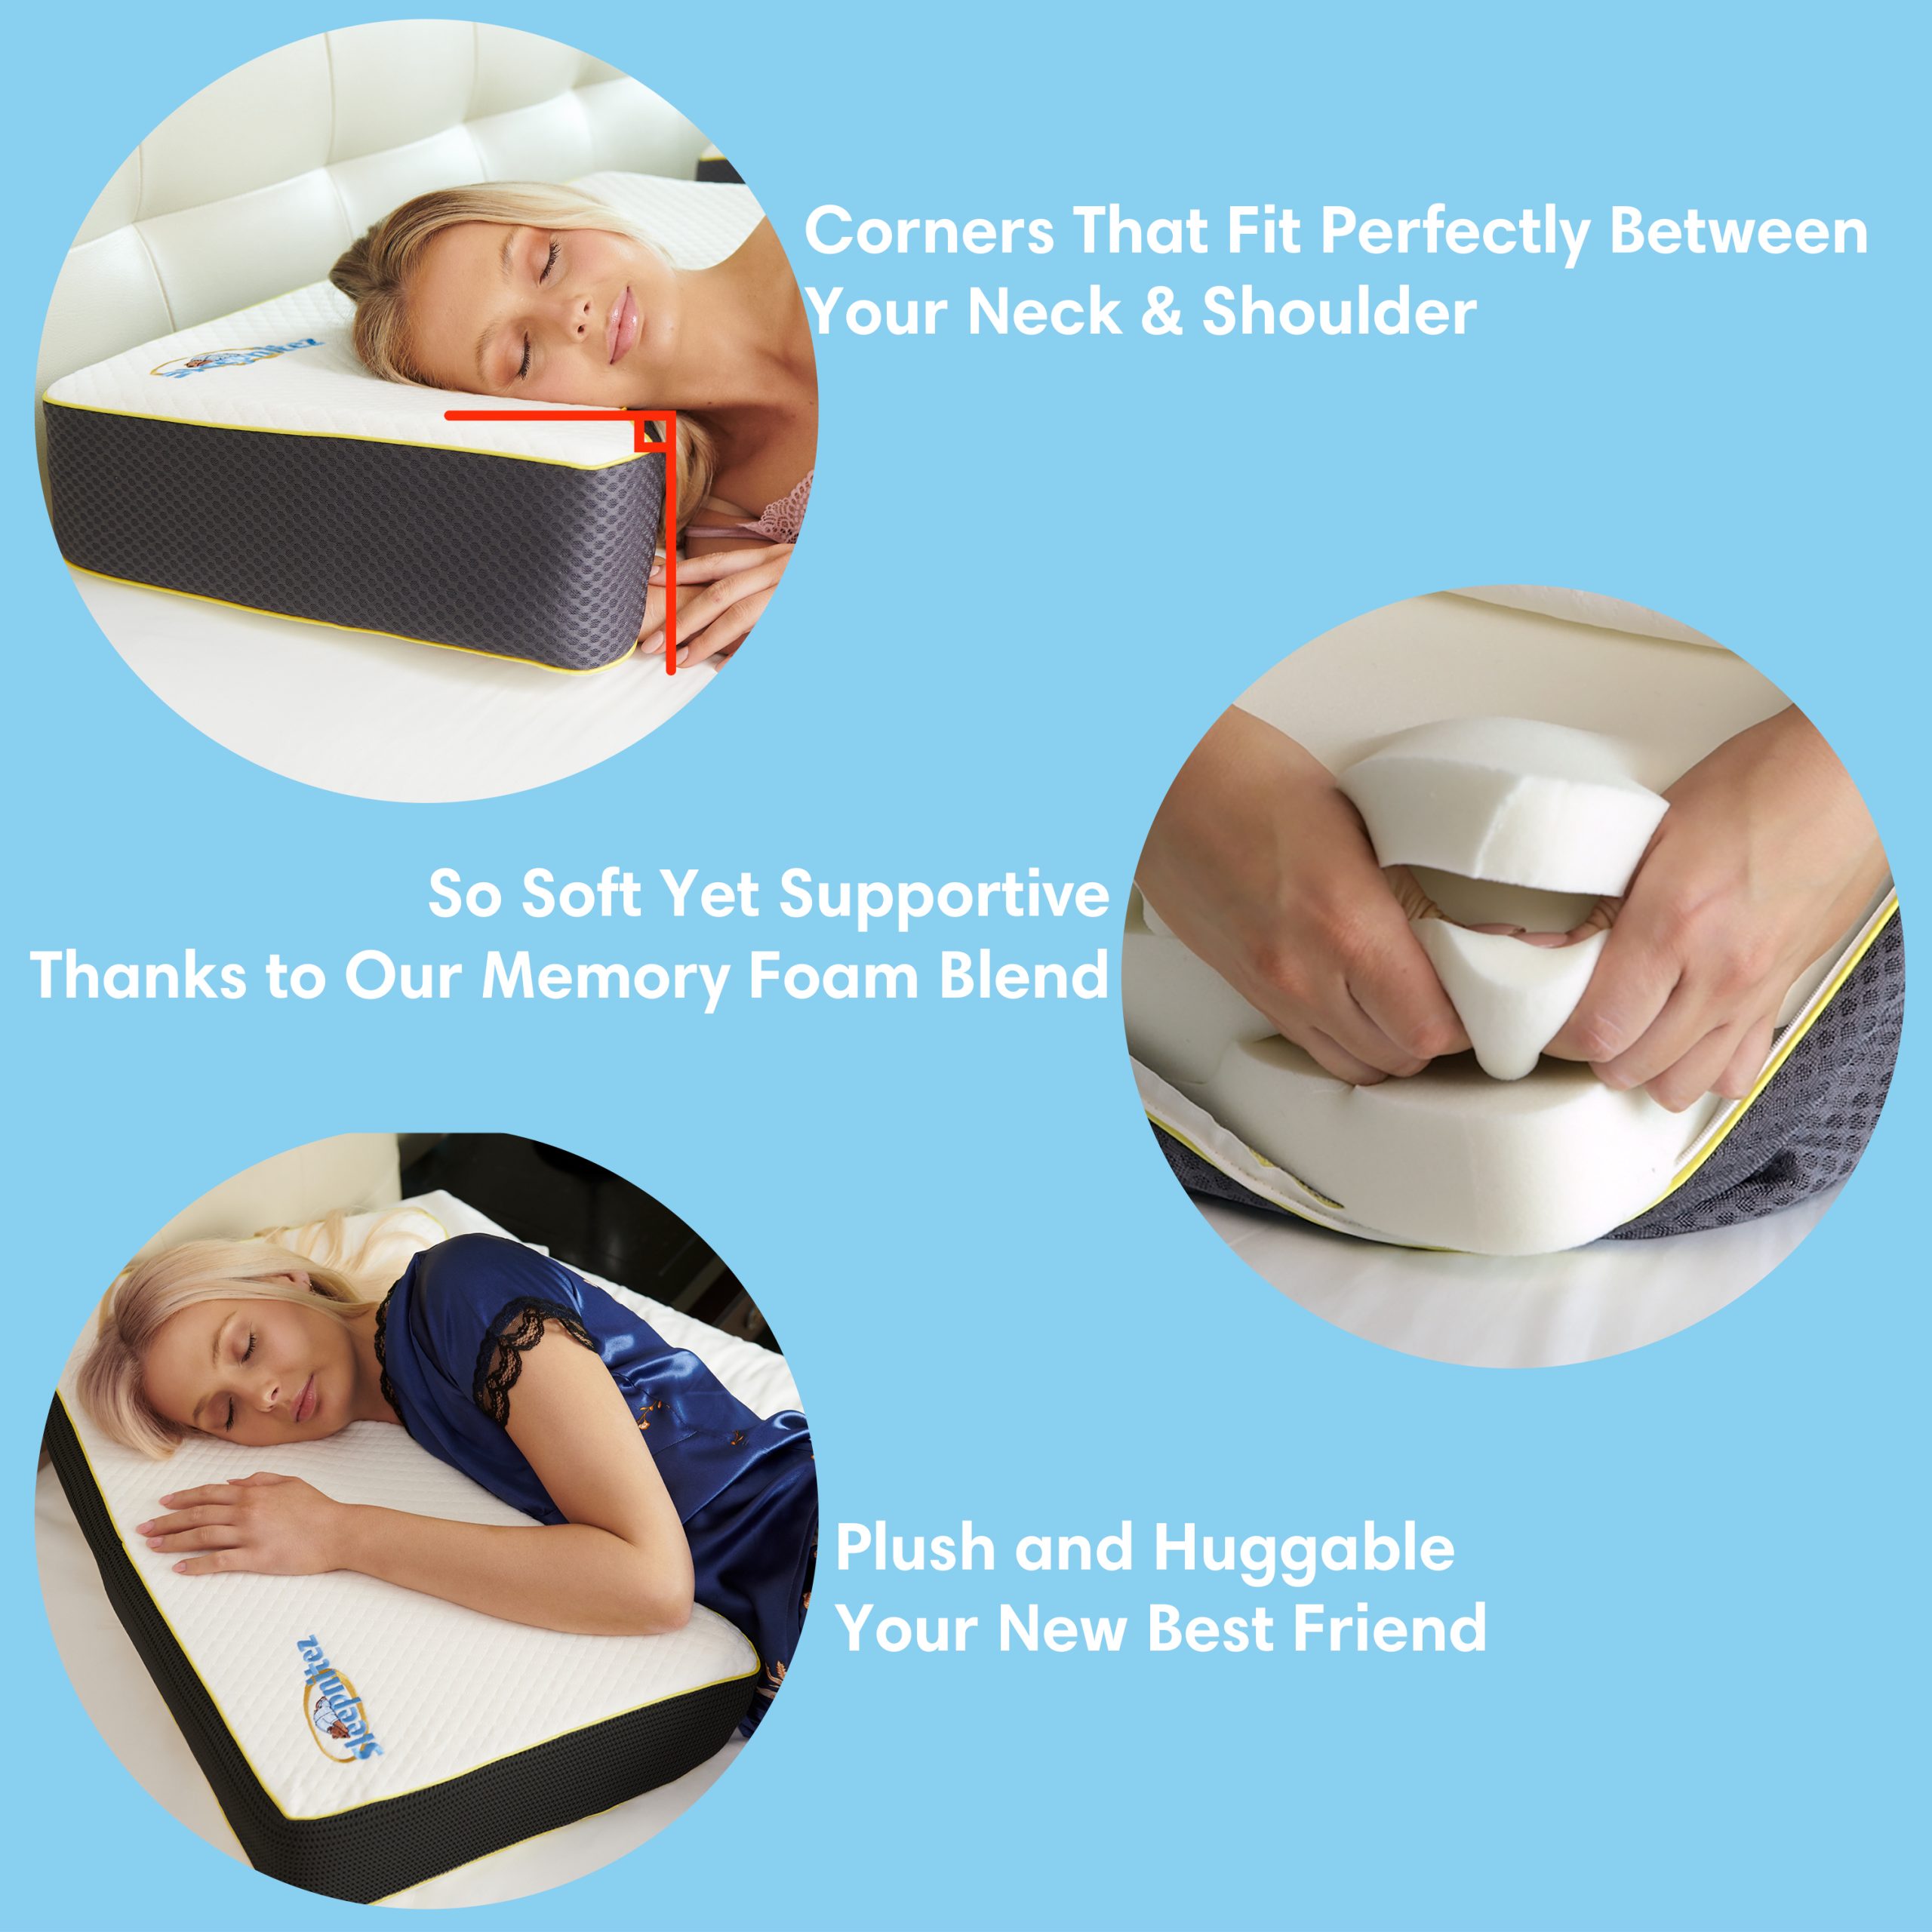 EZ Sleep Pillow - For back and joint pain sufferers, discomfort